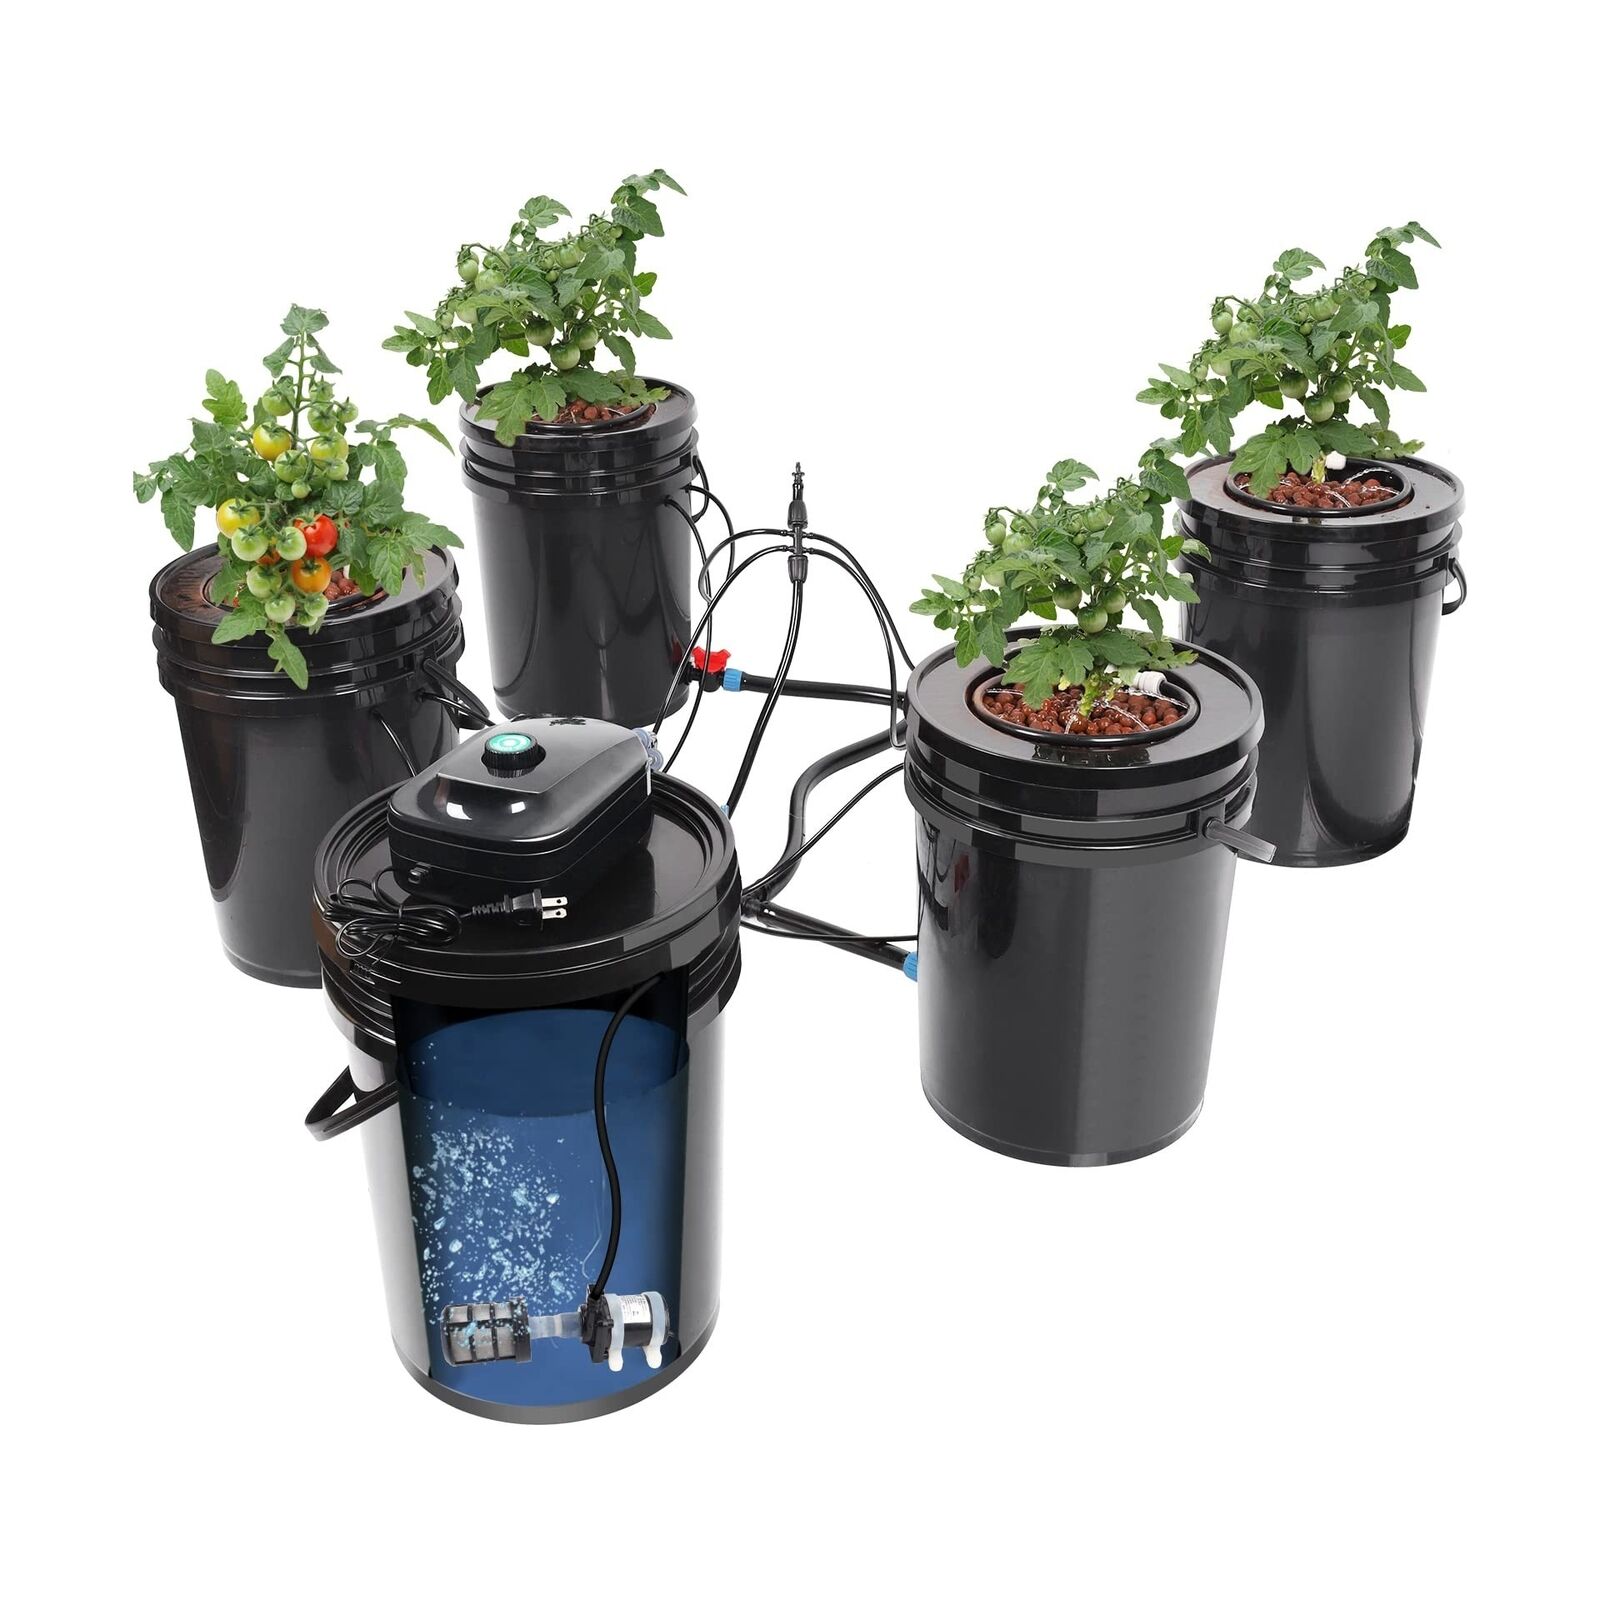 RDWC Top Feed Drip Hydroponics Systems, Recirculating Deep Water Culture Hydr...